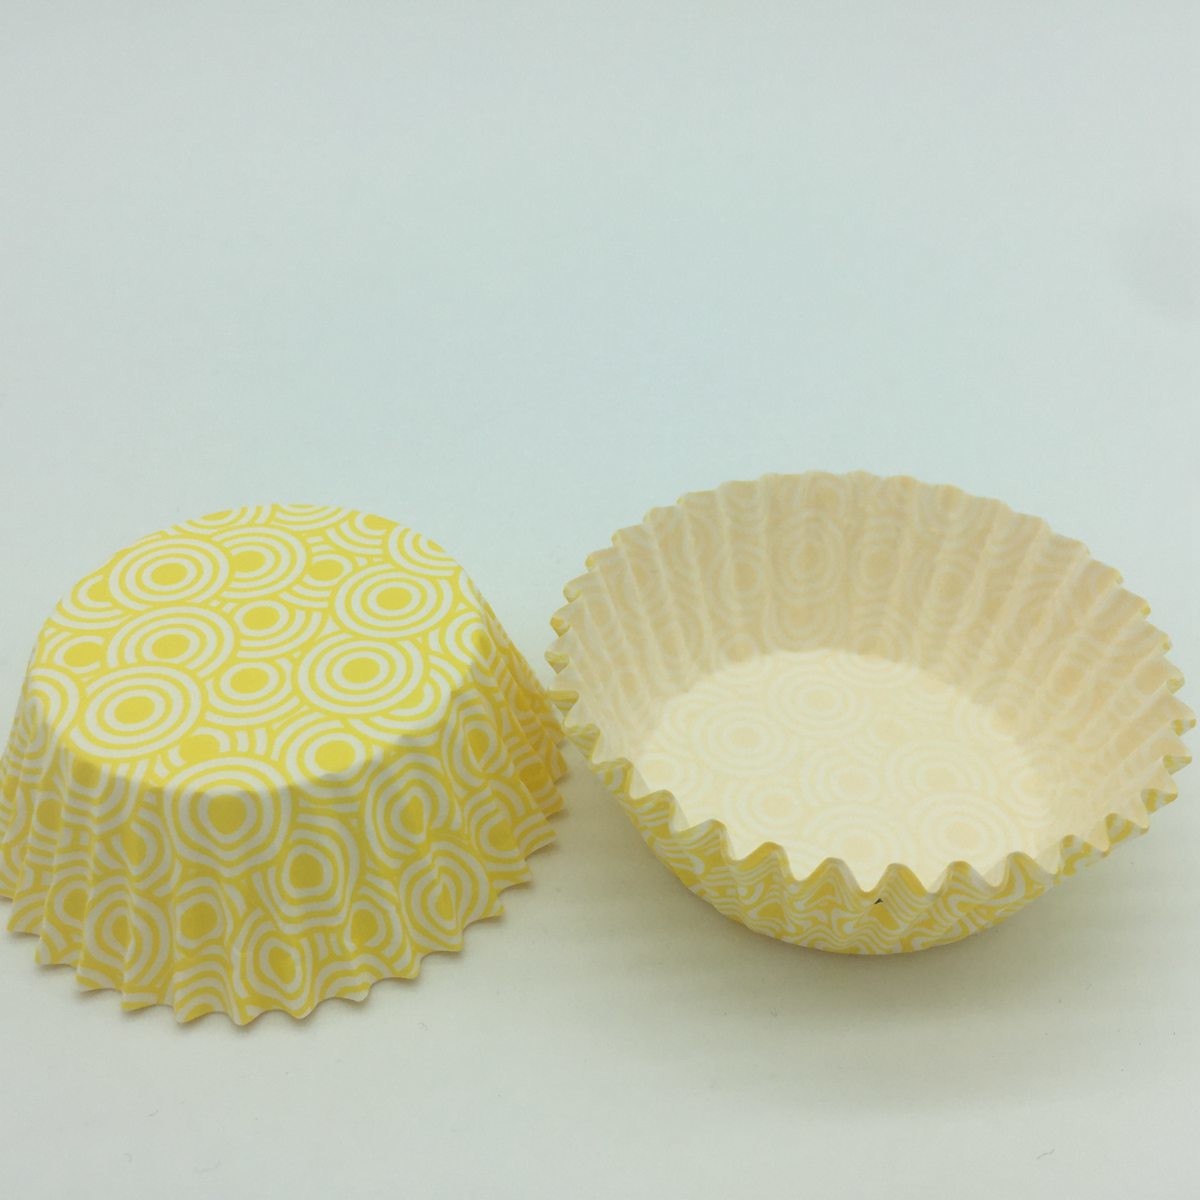  Yellow Cwedding Cupcake Holders , Greaseproof Paper Muffin Cases Cups Wrappers Manufactures